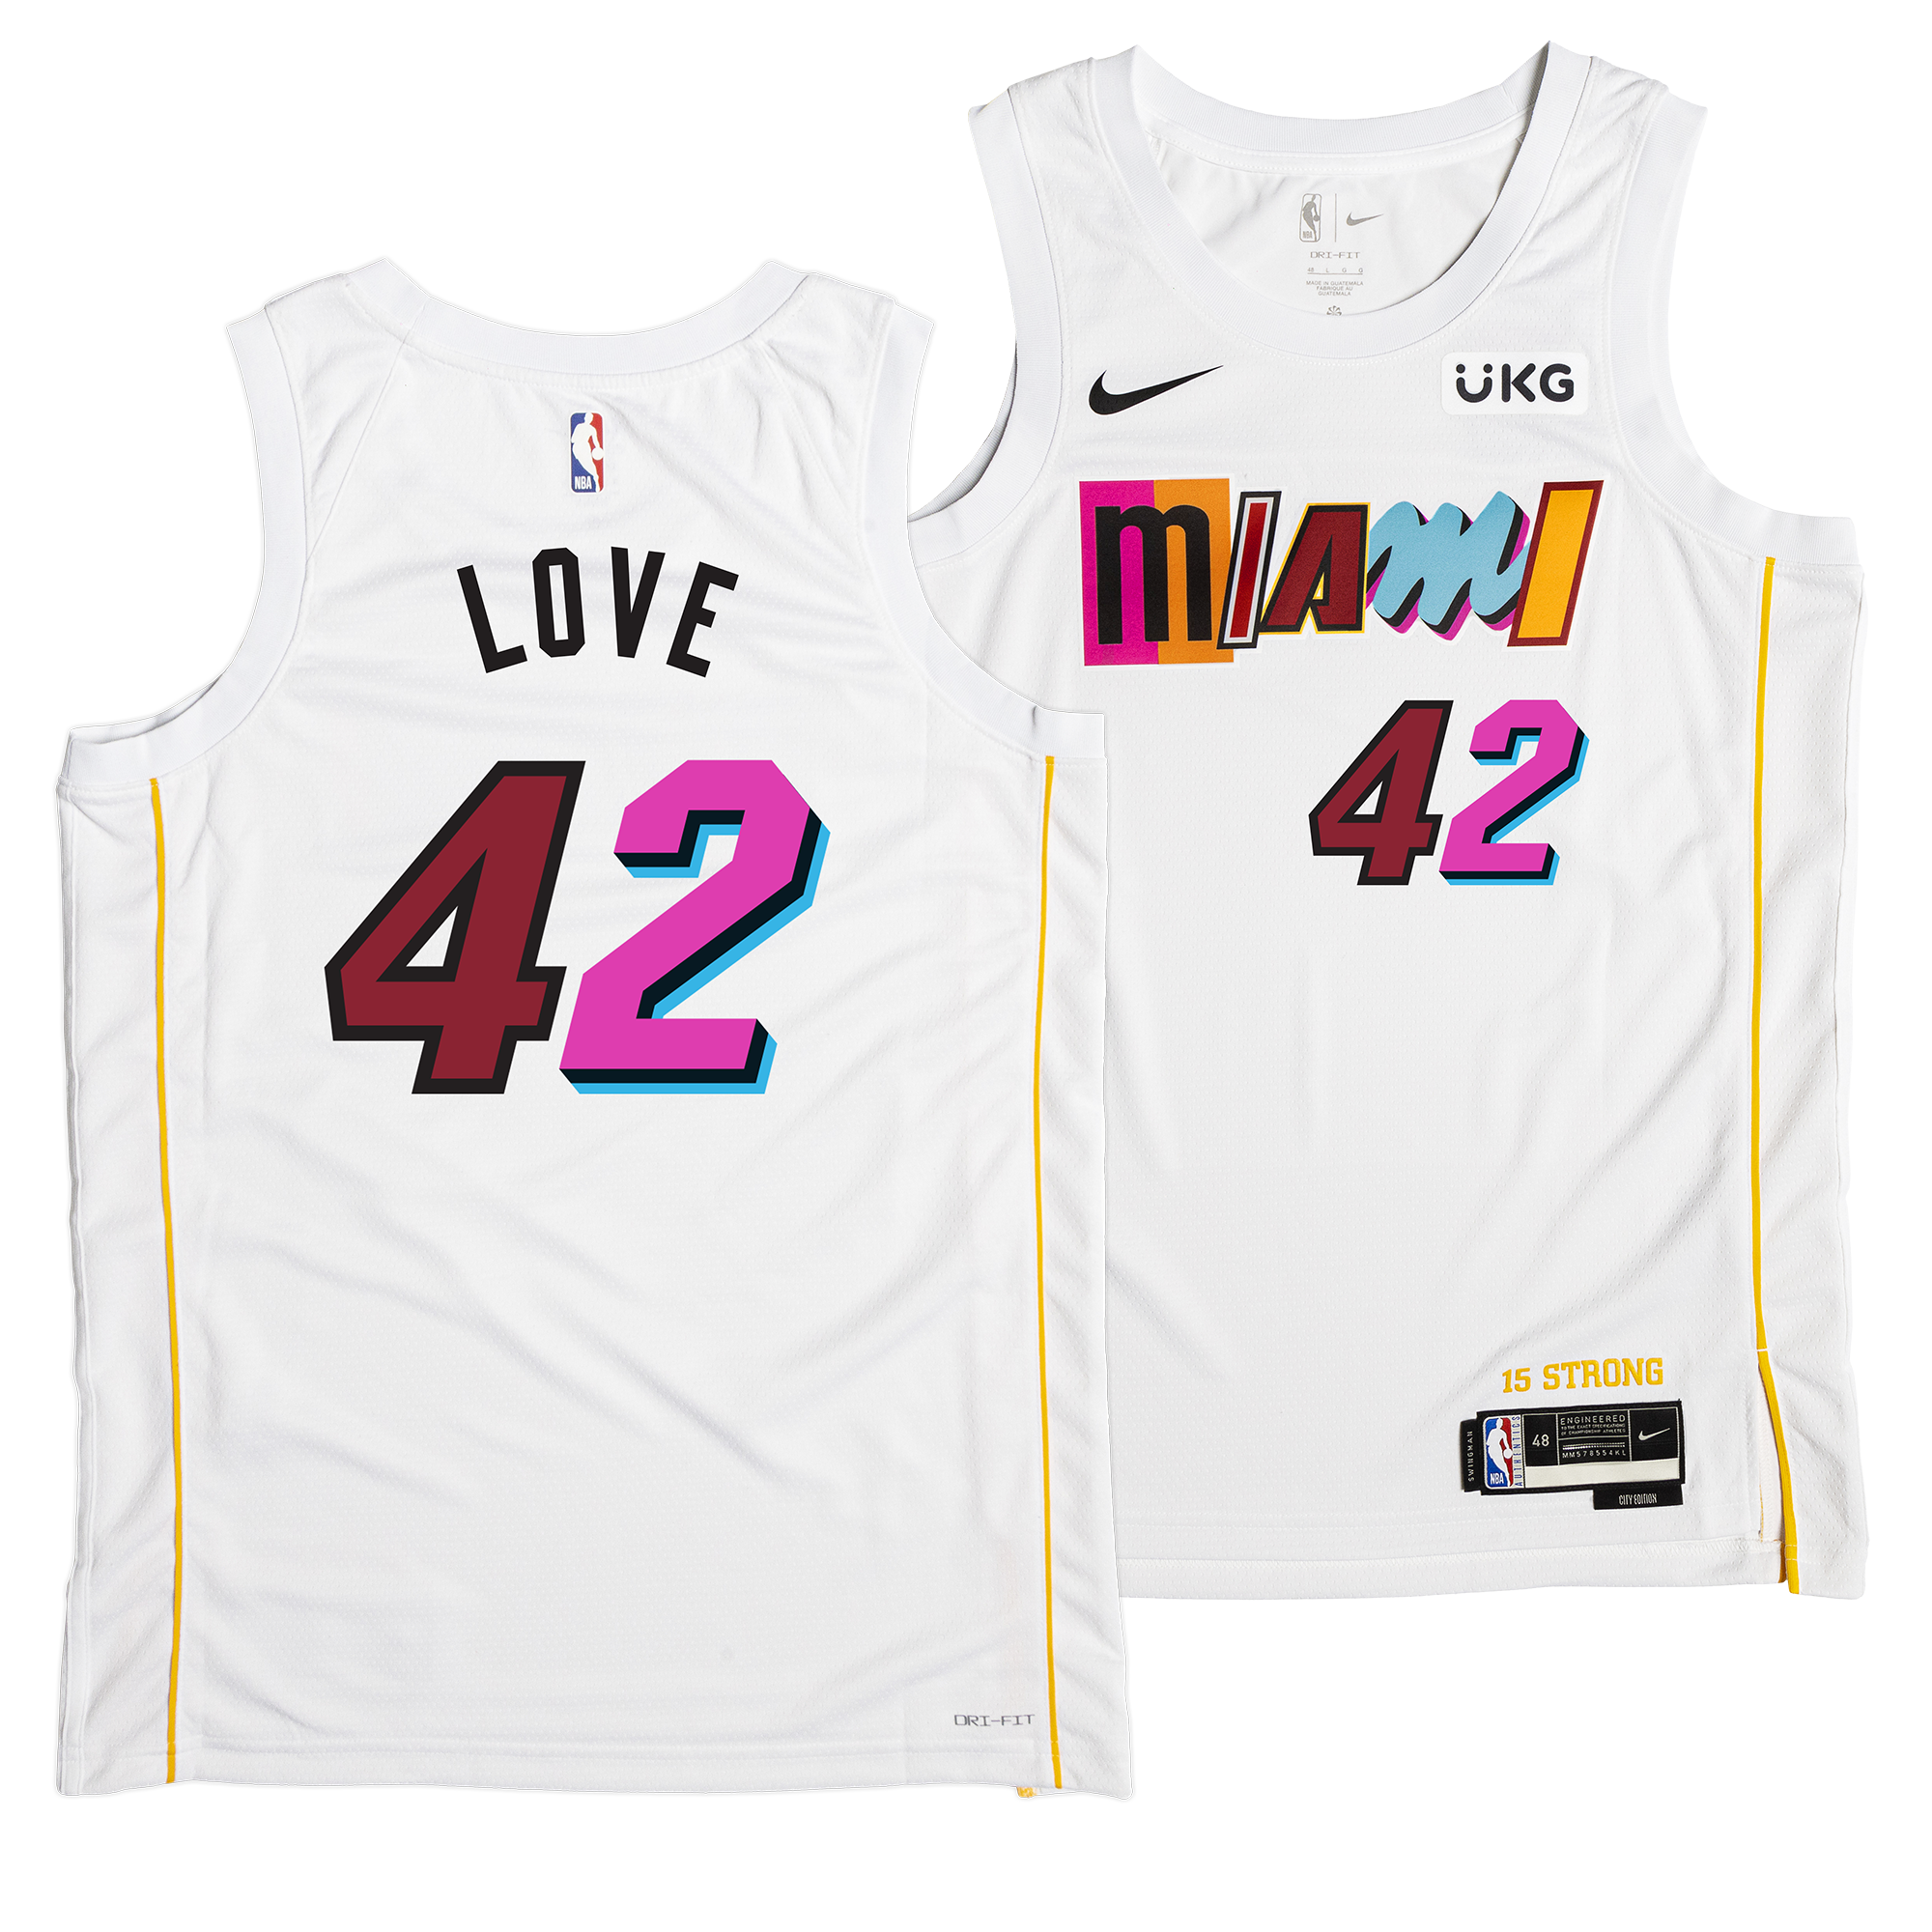  Outerstuff NBA Boys Youth (8-20) Kevin Love Cleveland Cavaliers  City Edition Swingman Jersey, Medium (10-12) : Sports & Outdoors